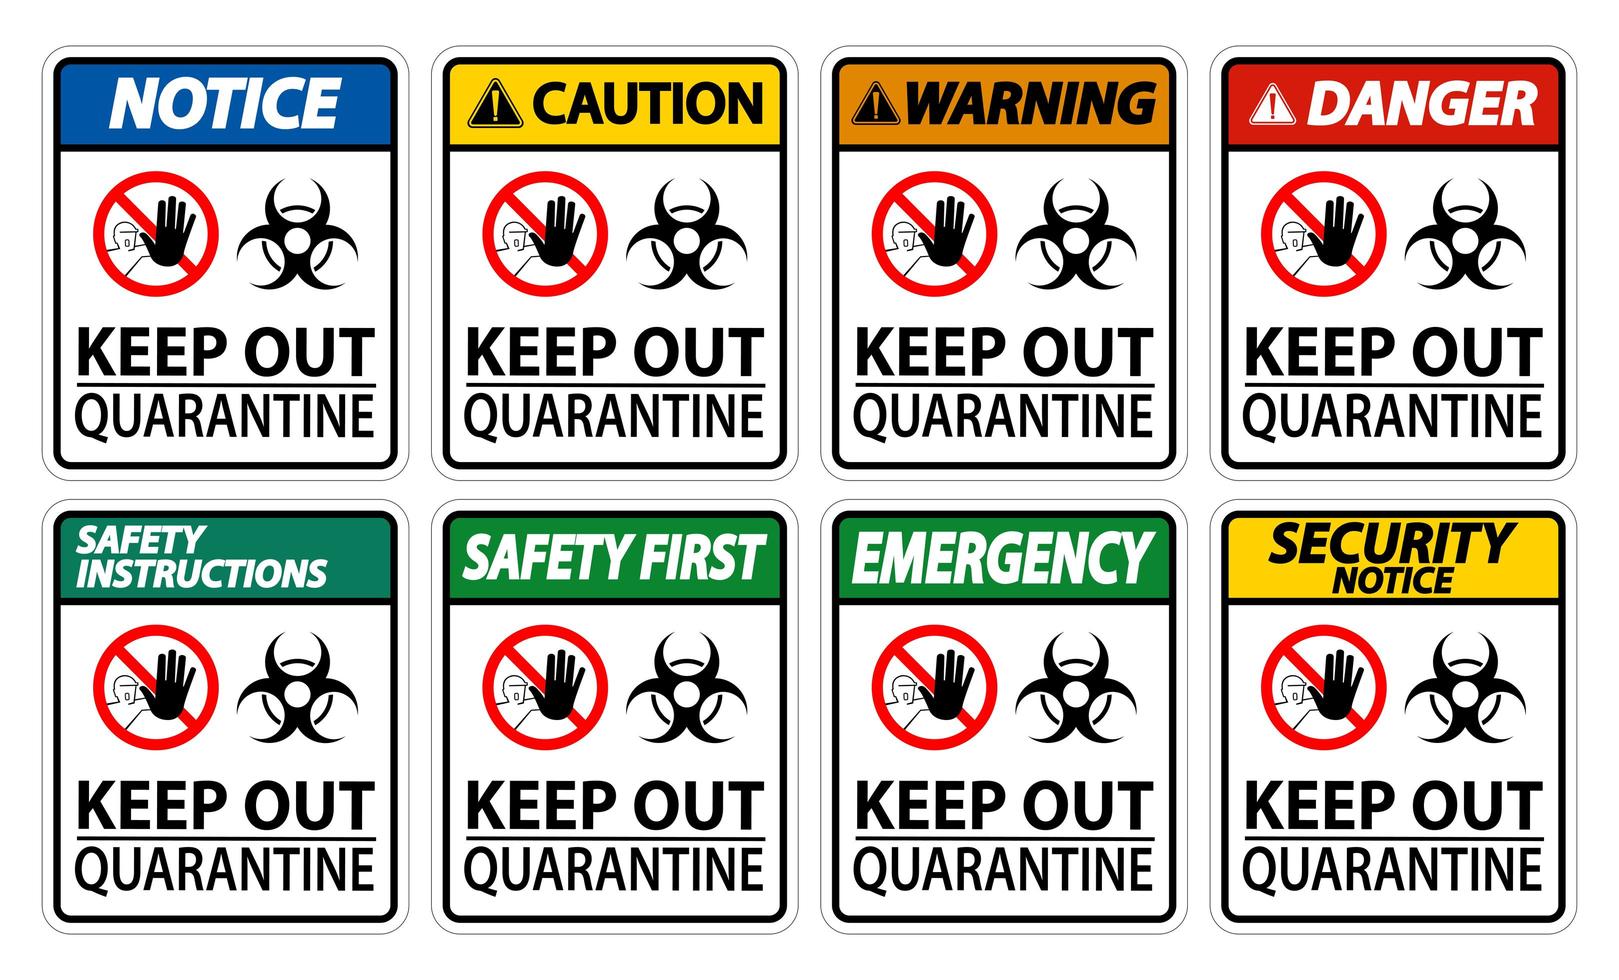 Keep Out Quarantine Sign  vector